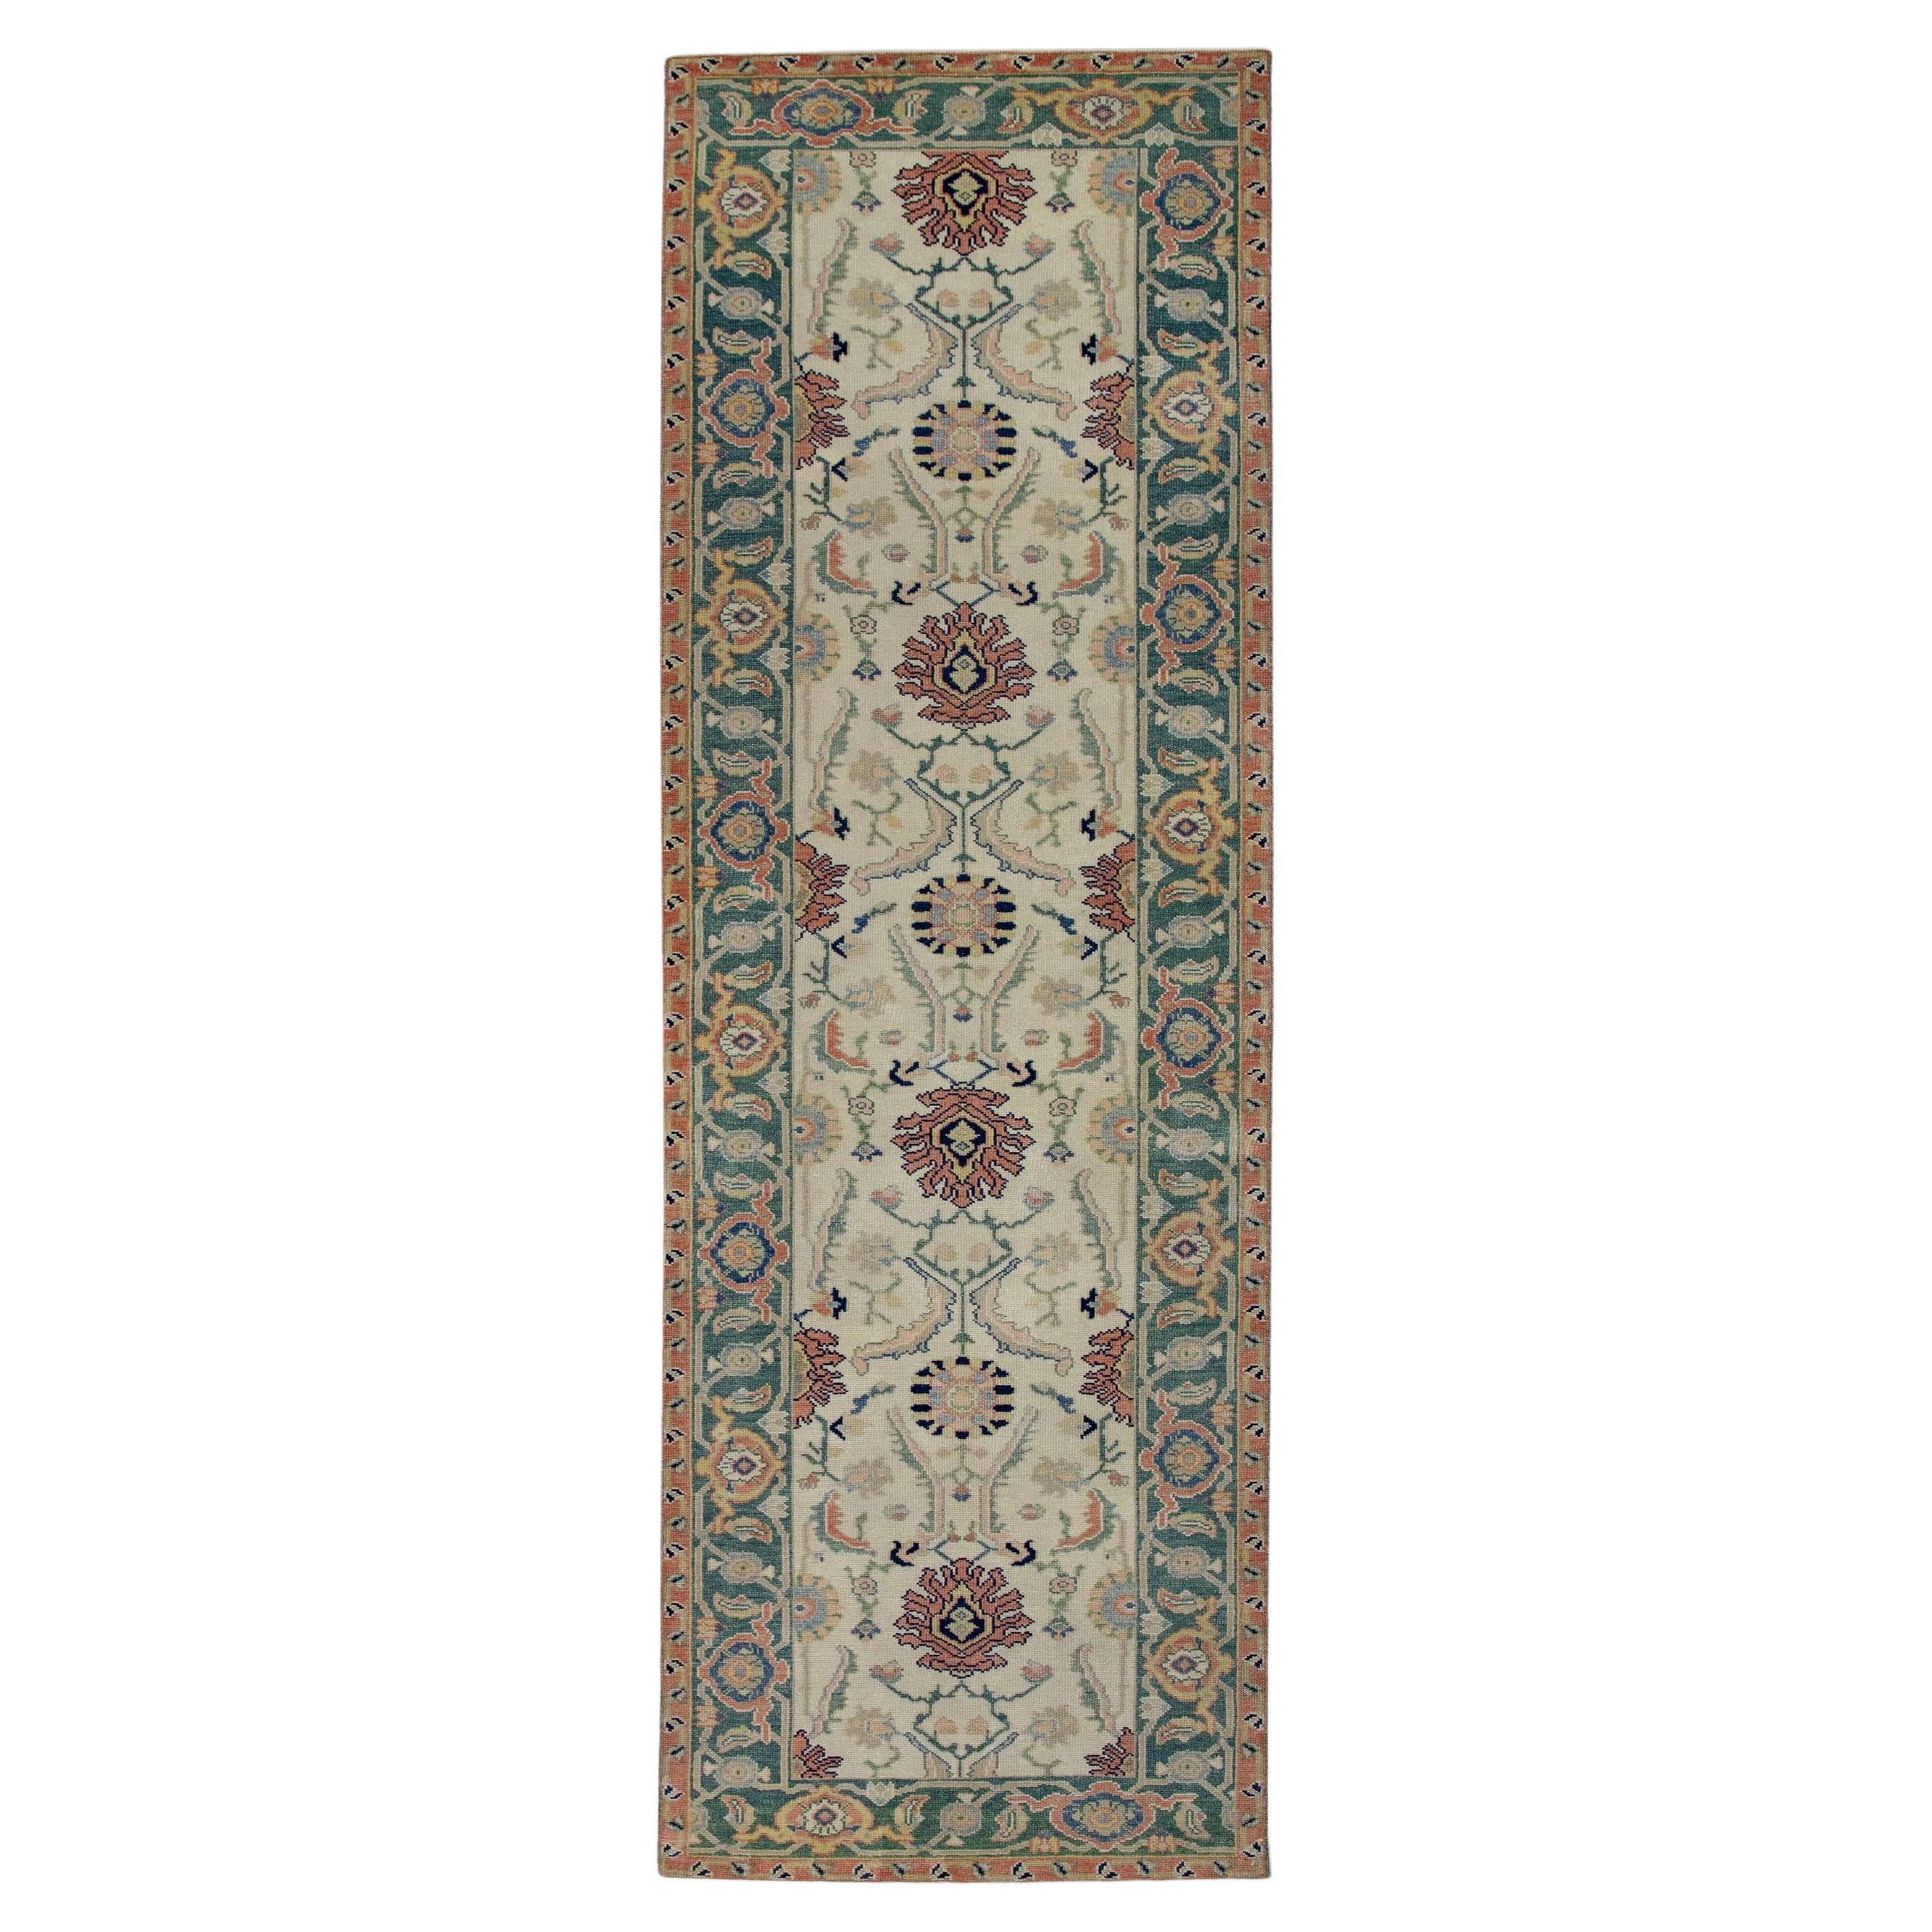 Floral Wool Turkish Finewoven Oushak Rug in Red, Cream, and Green 2'7" x 9'6"